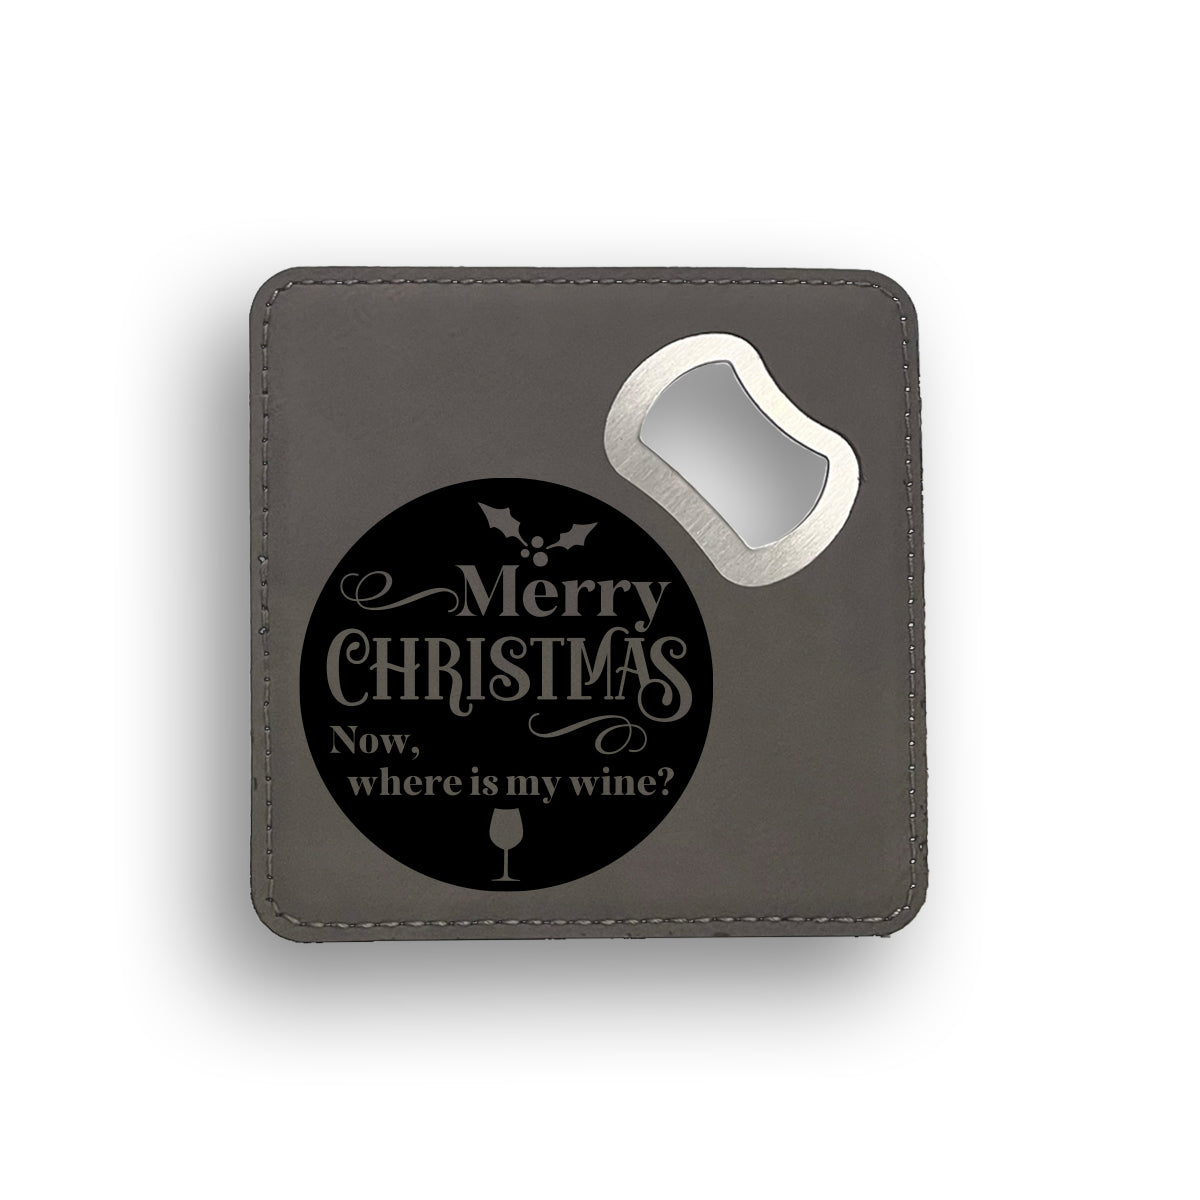 Merry Christmas Now Where Is The Wine Bottle Opener Coaster